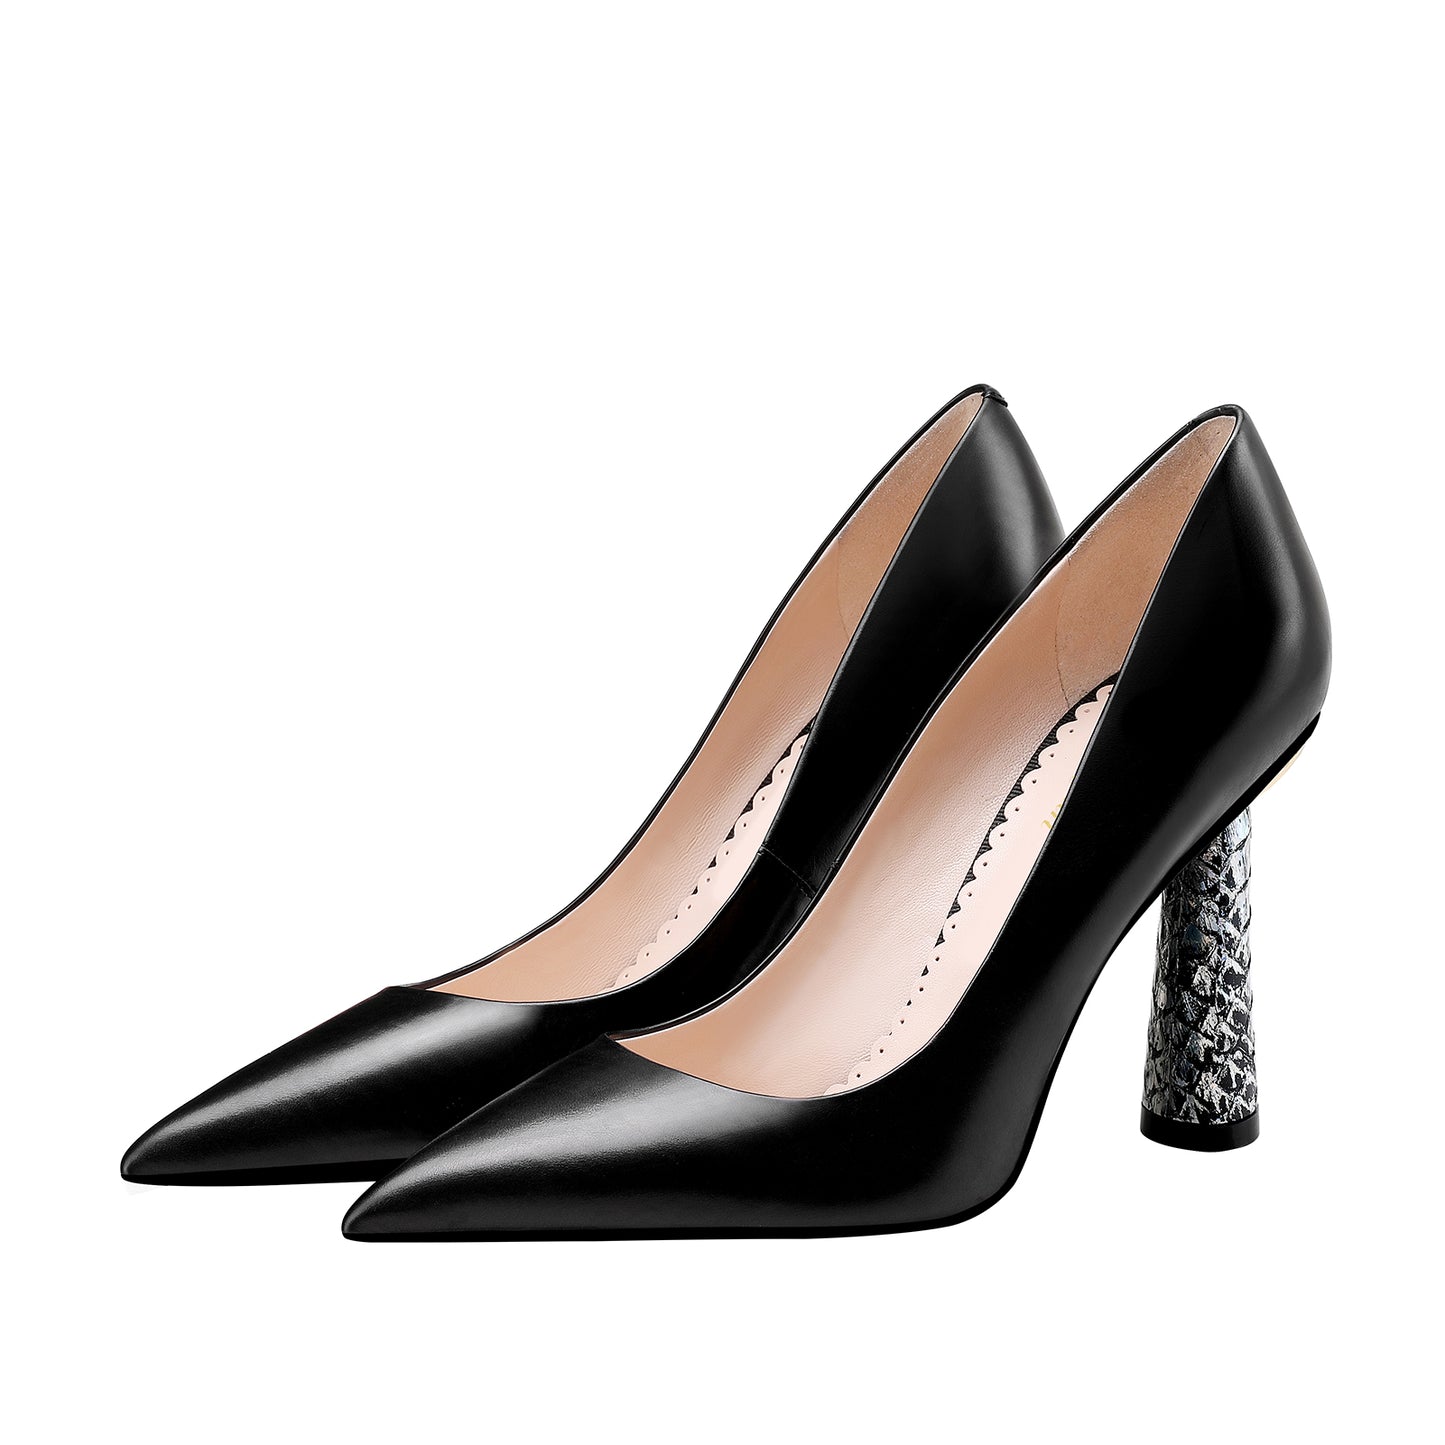 Leather Heels for Women: Pointed Toe Pumps Block High Heel